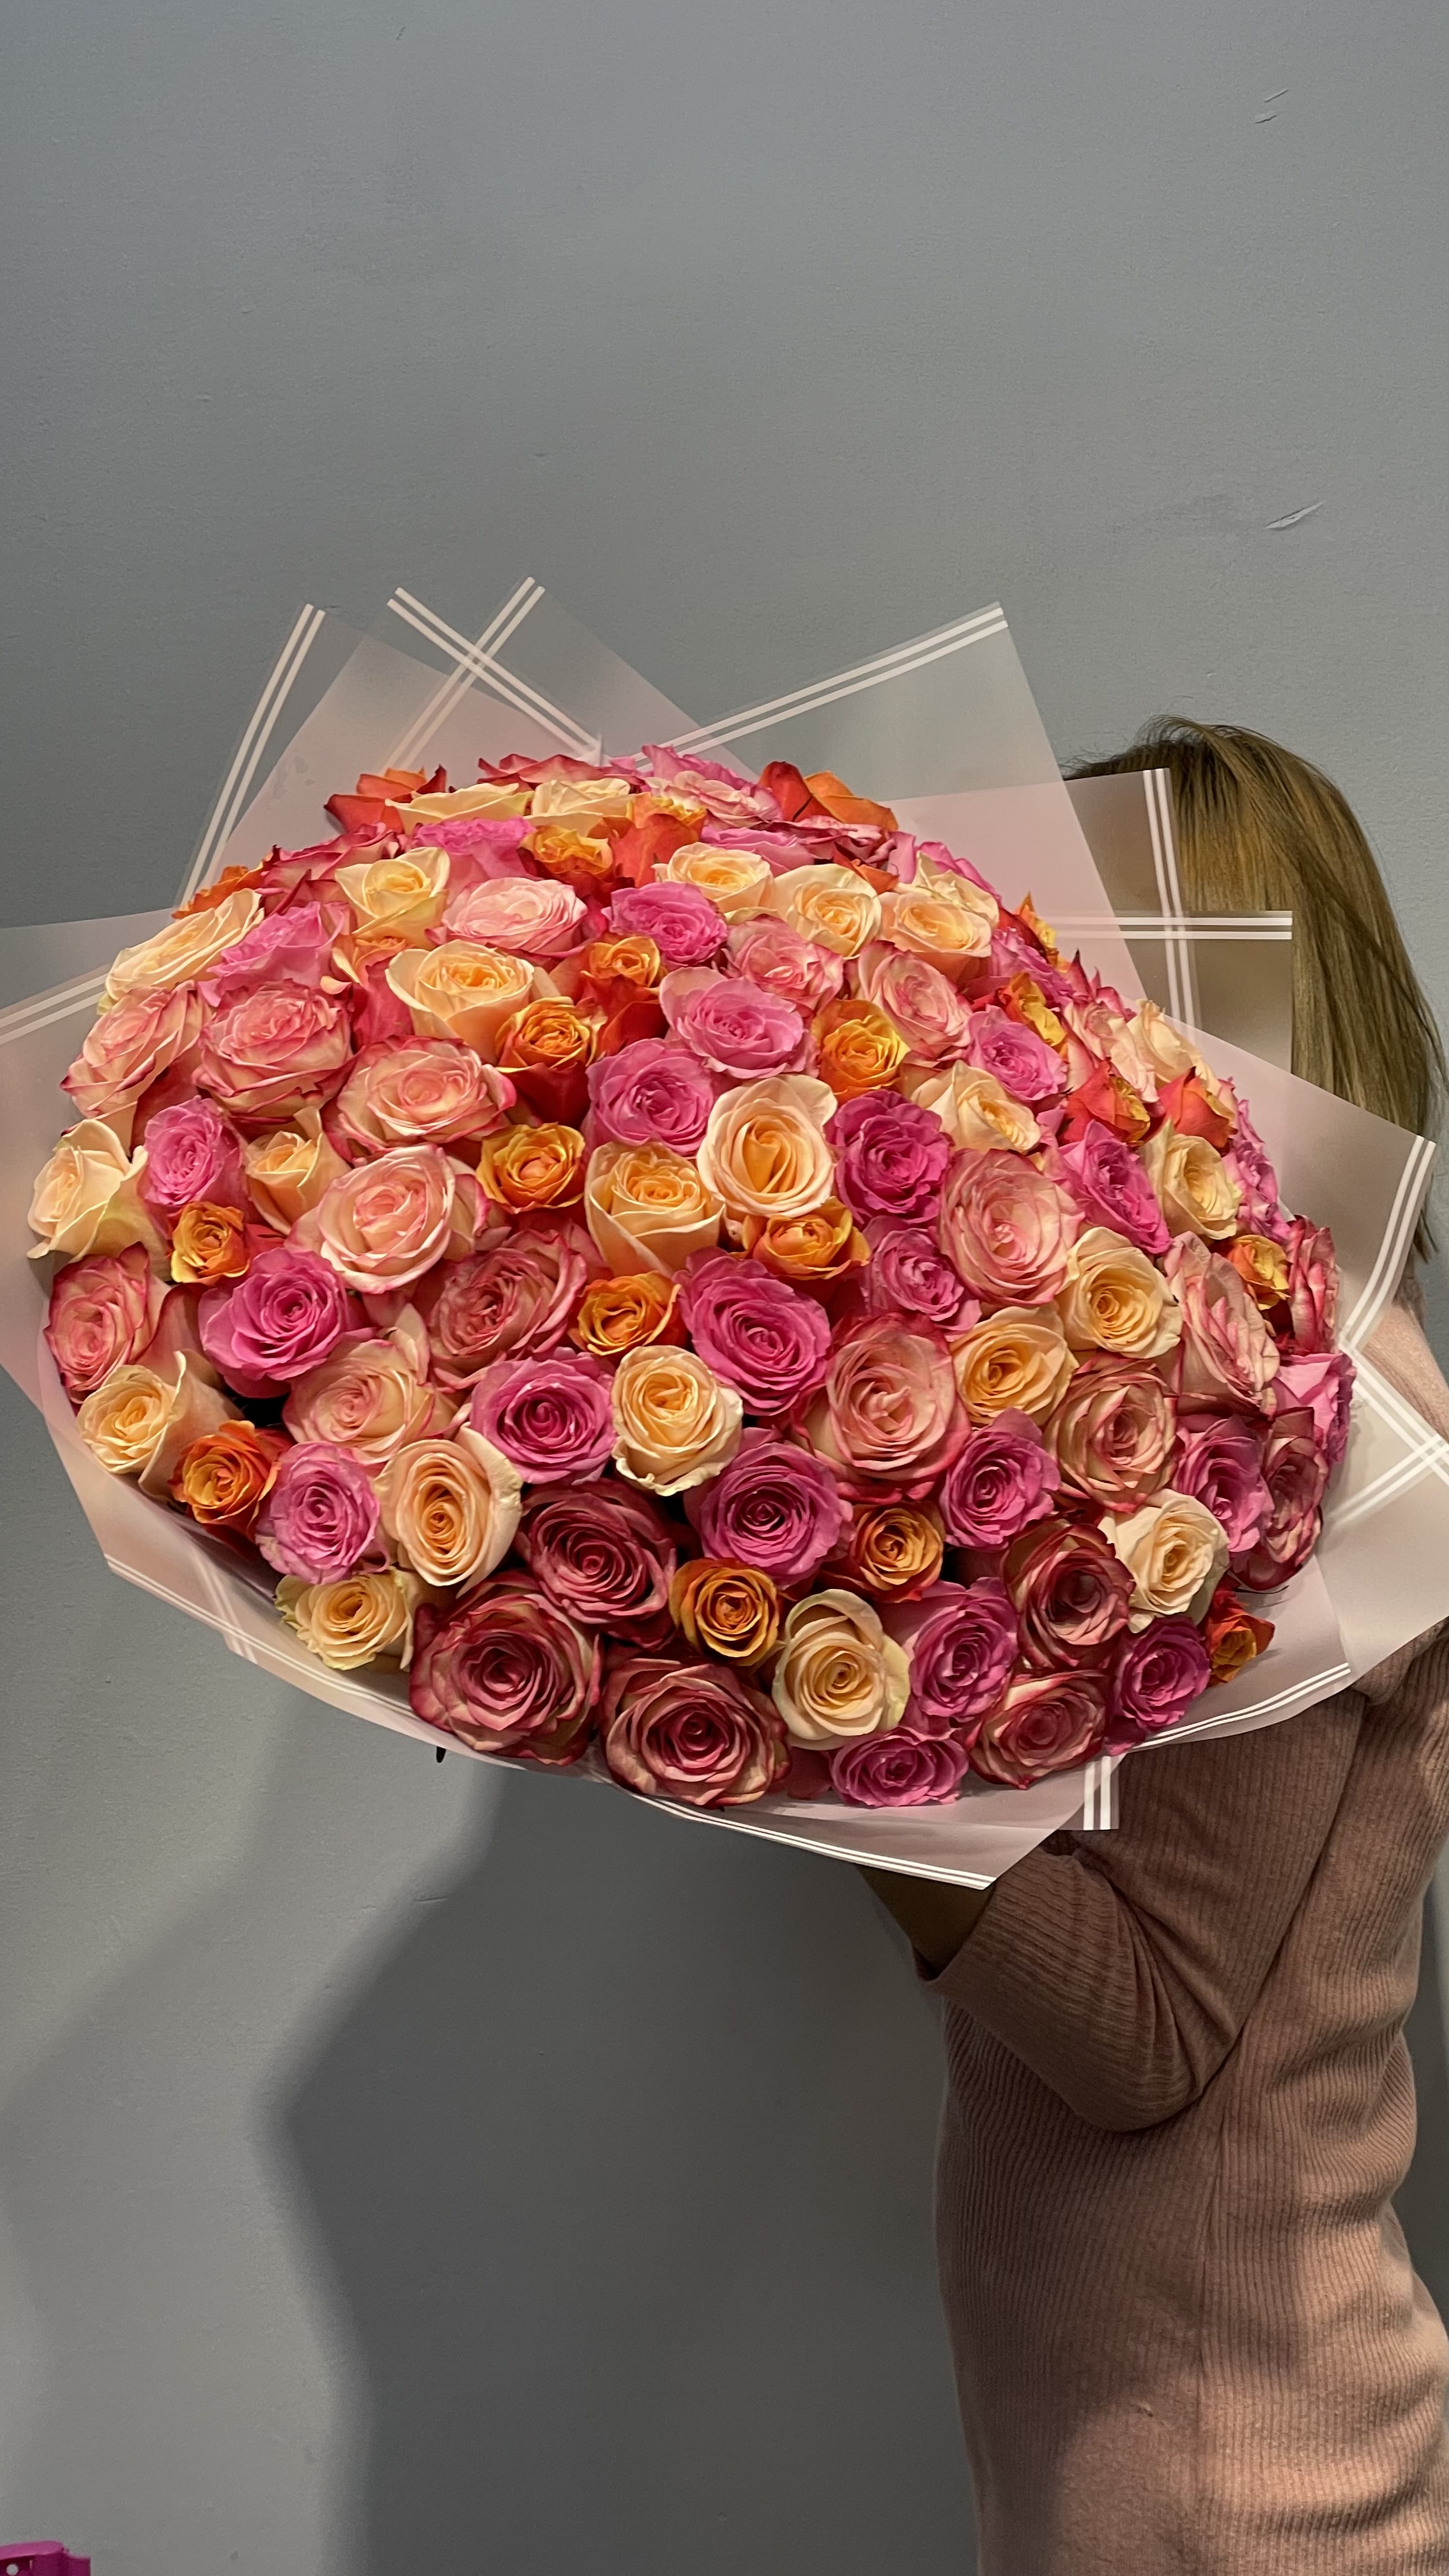 Bouquet of Roses mix 101 flowers delivered to Astana